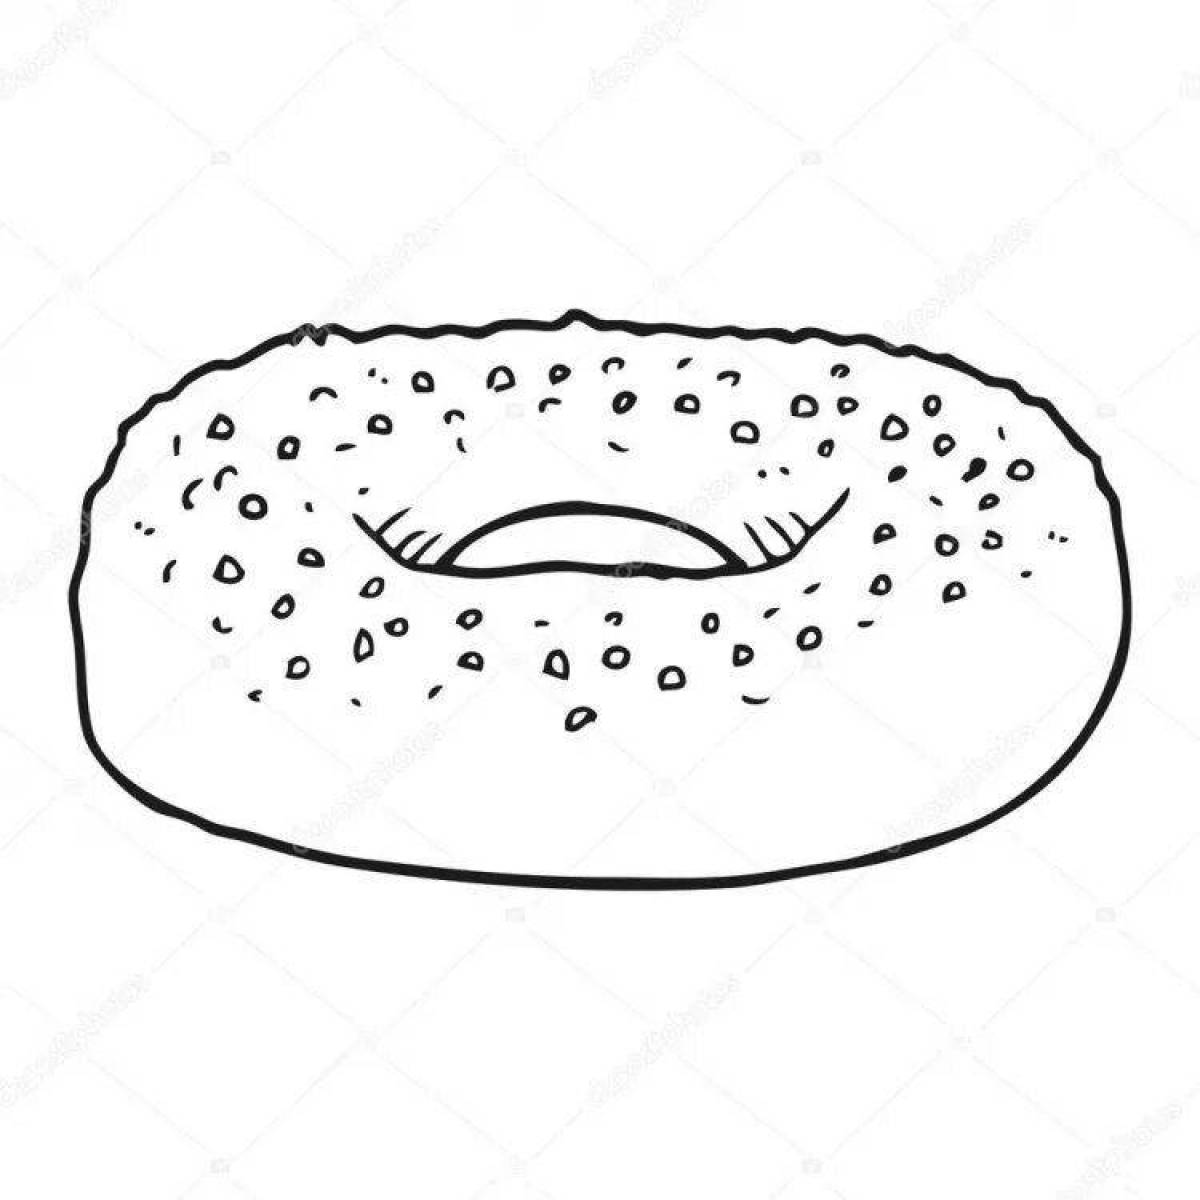 Ambrosial donut coloring page